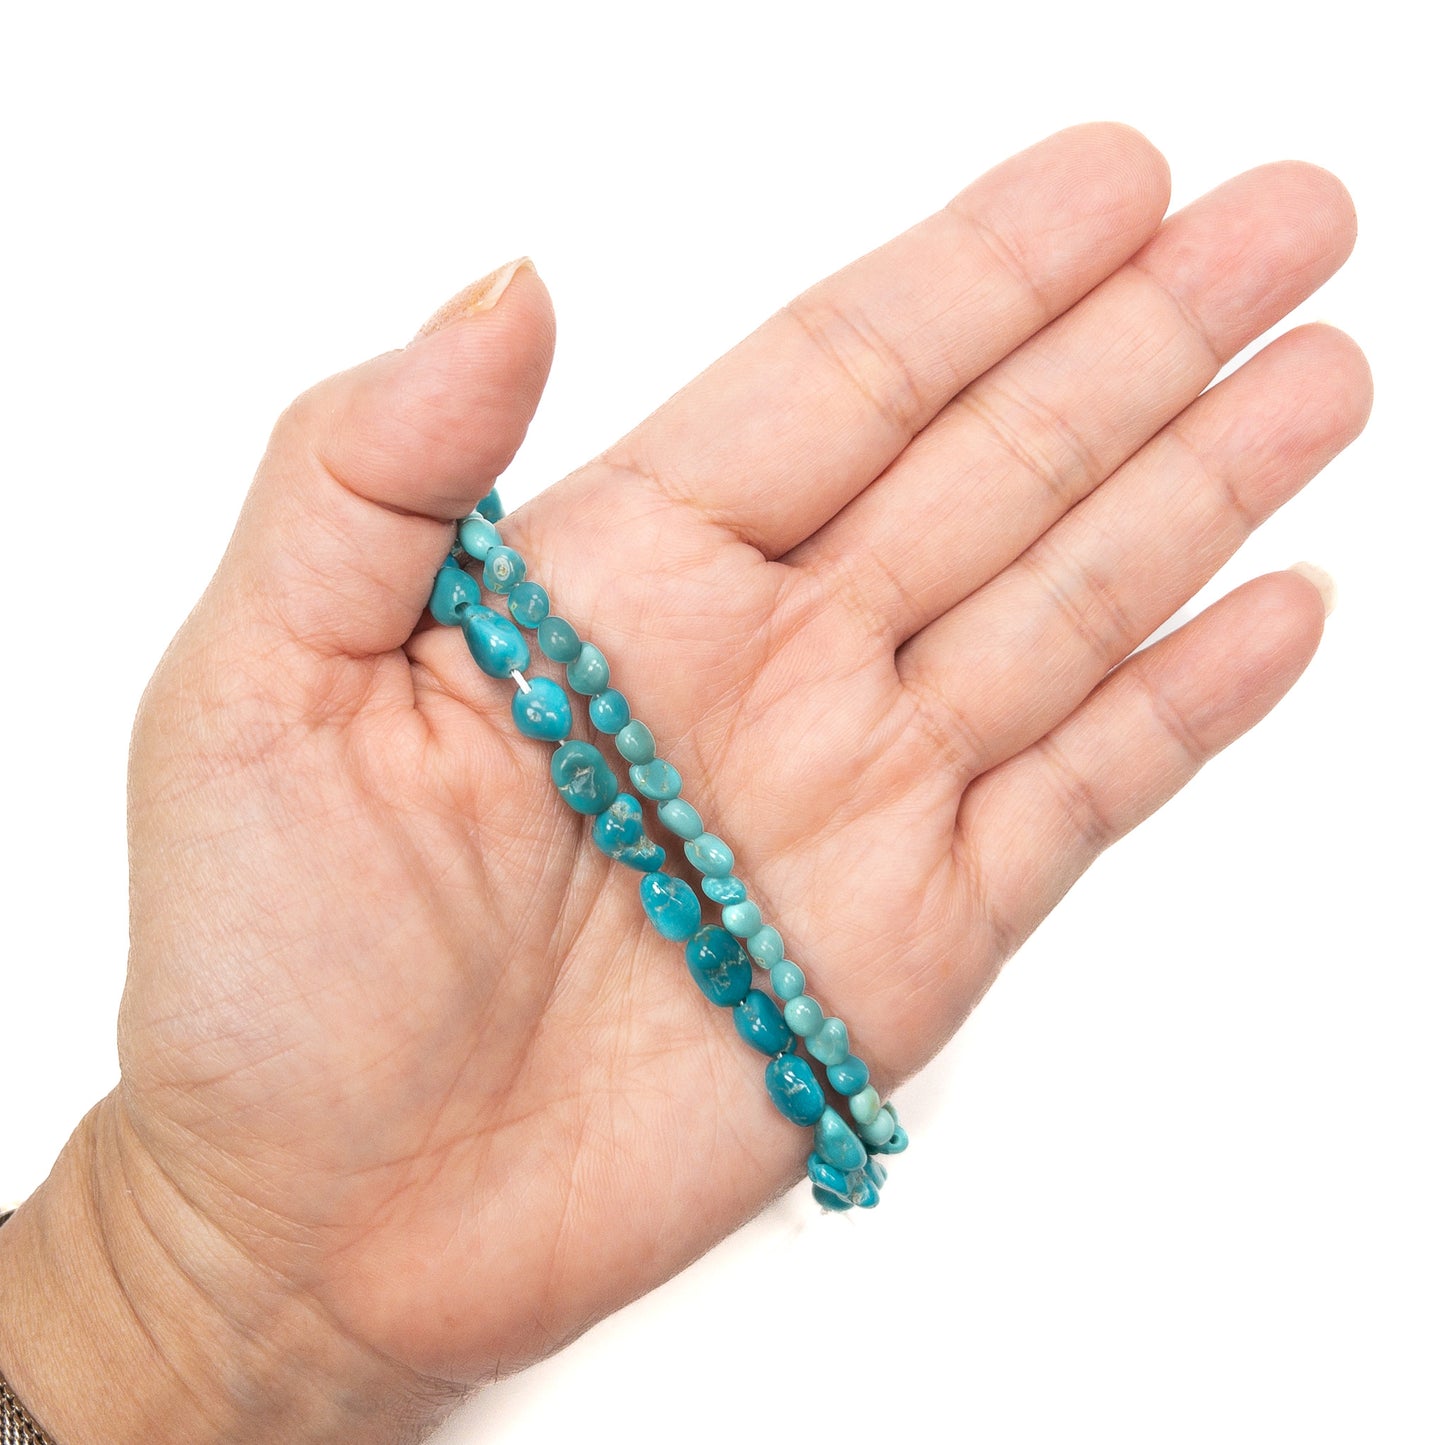 Sleeping Beauty Turquoise Small Tumbled Nugget Bead - 8" Strand